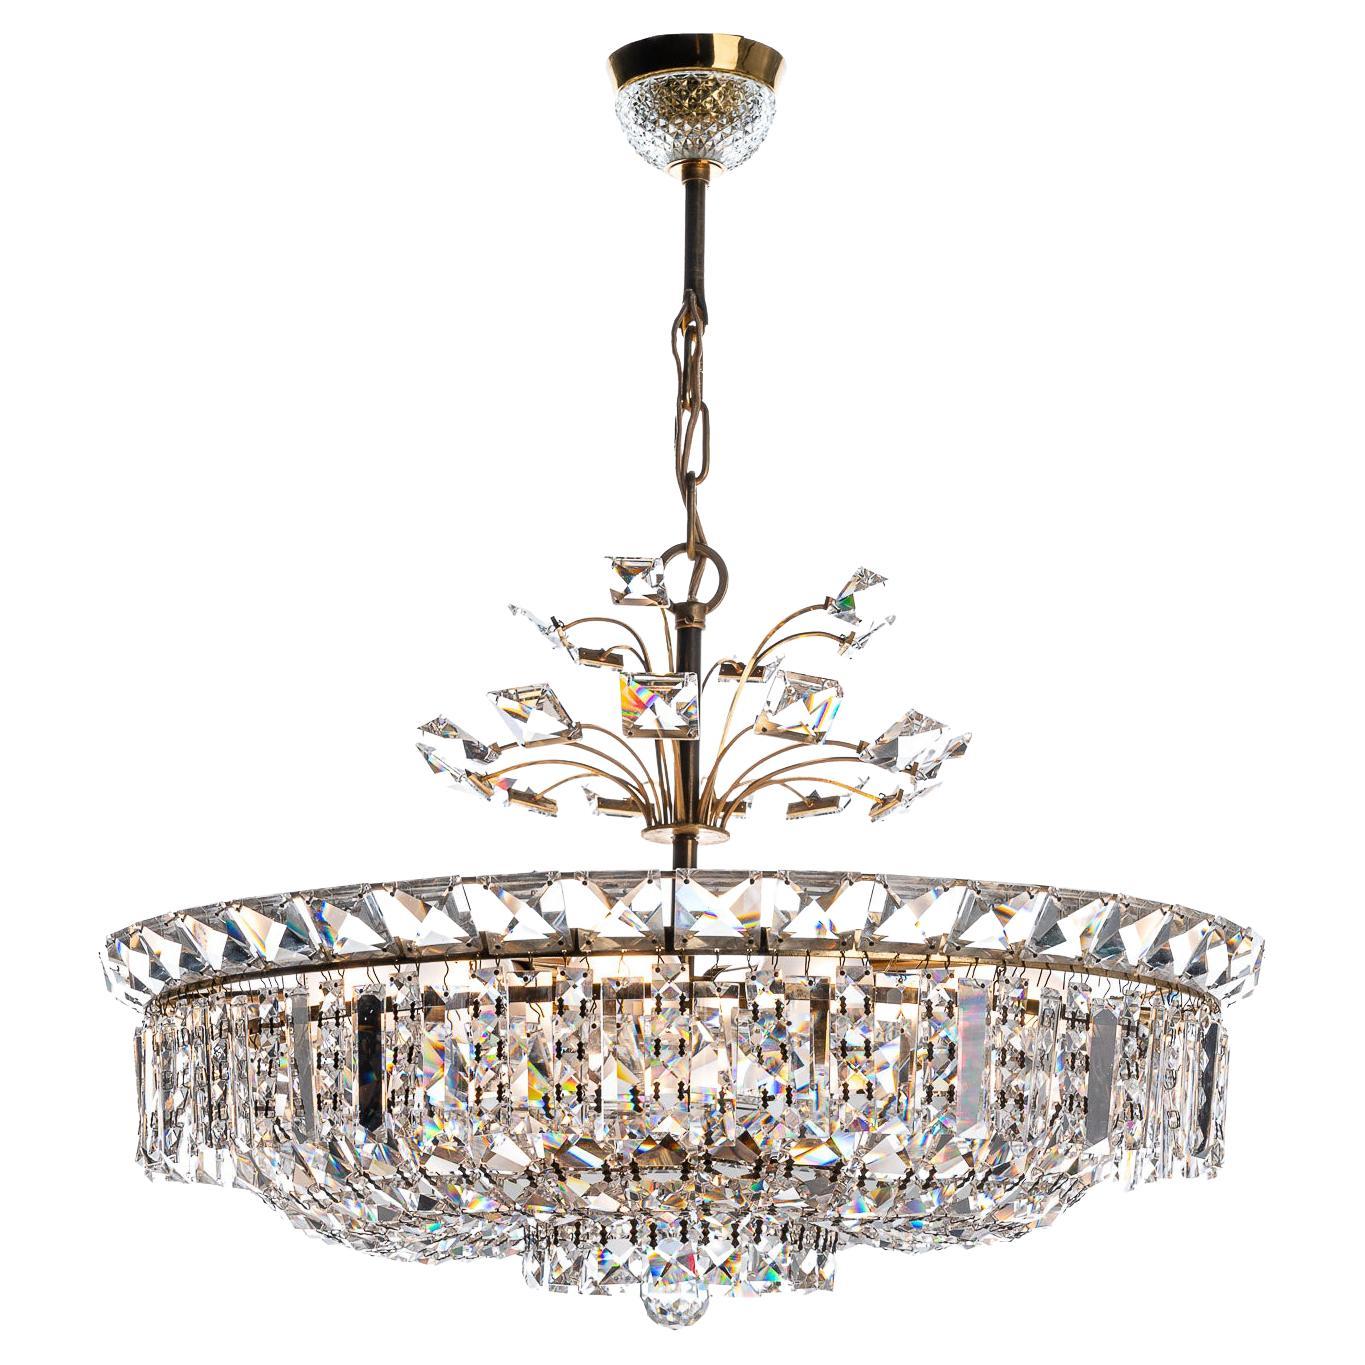 1940's Brass & Glass Chandelier Attributed to Bakalowits